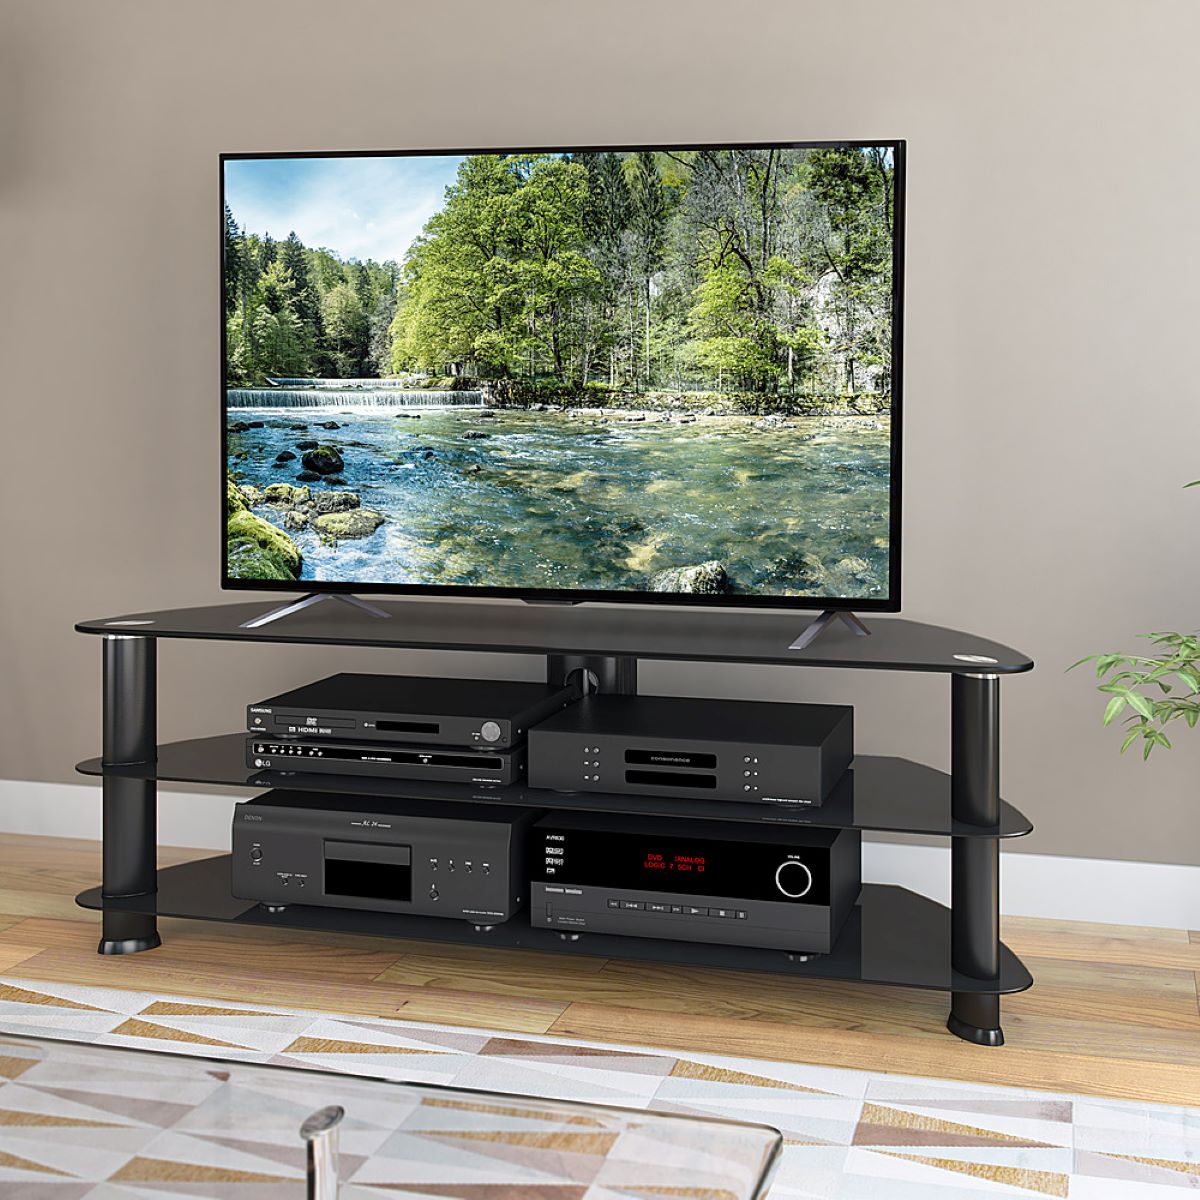 How To Keep Dust Off Glass TV Stand